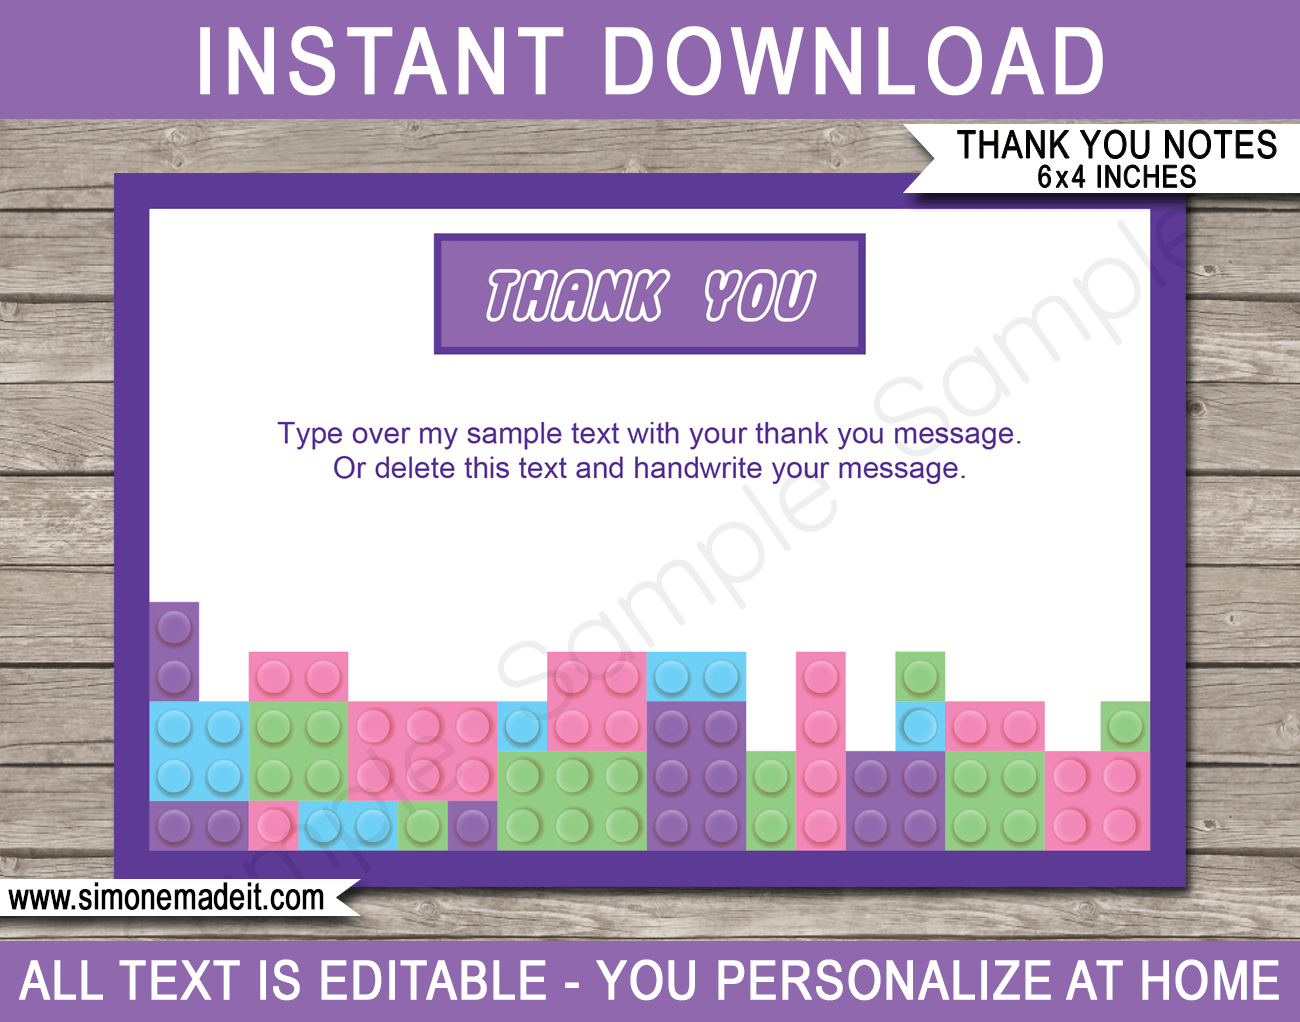 Printable Lego Friends Thank You Cards Template - Lego Friends Birthday Party theme - Editable Text - Instant Download via simonemadeit.com